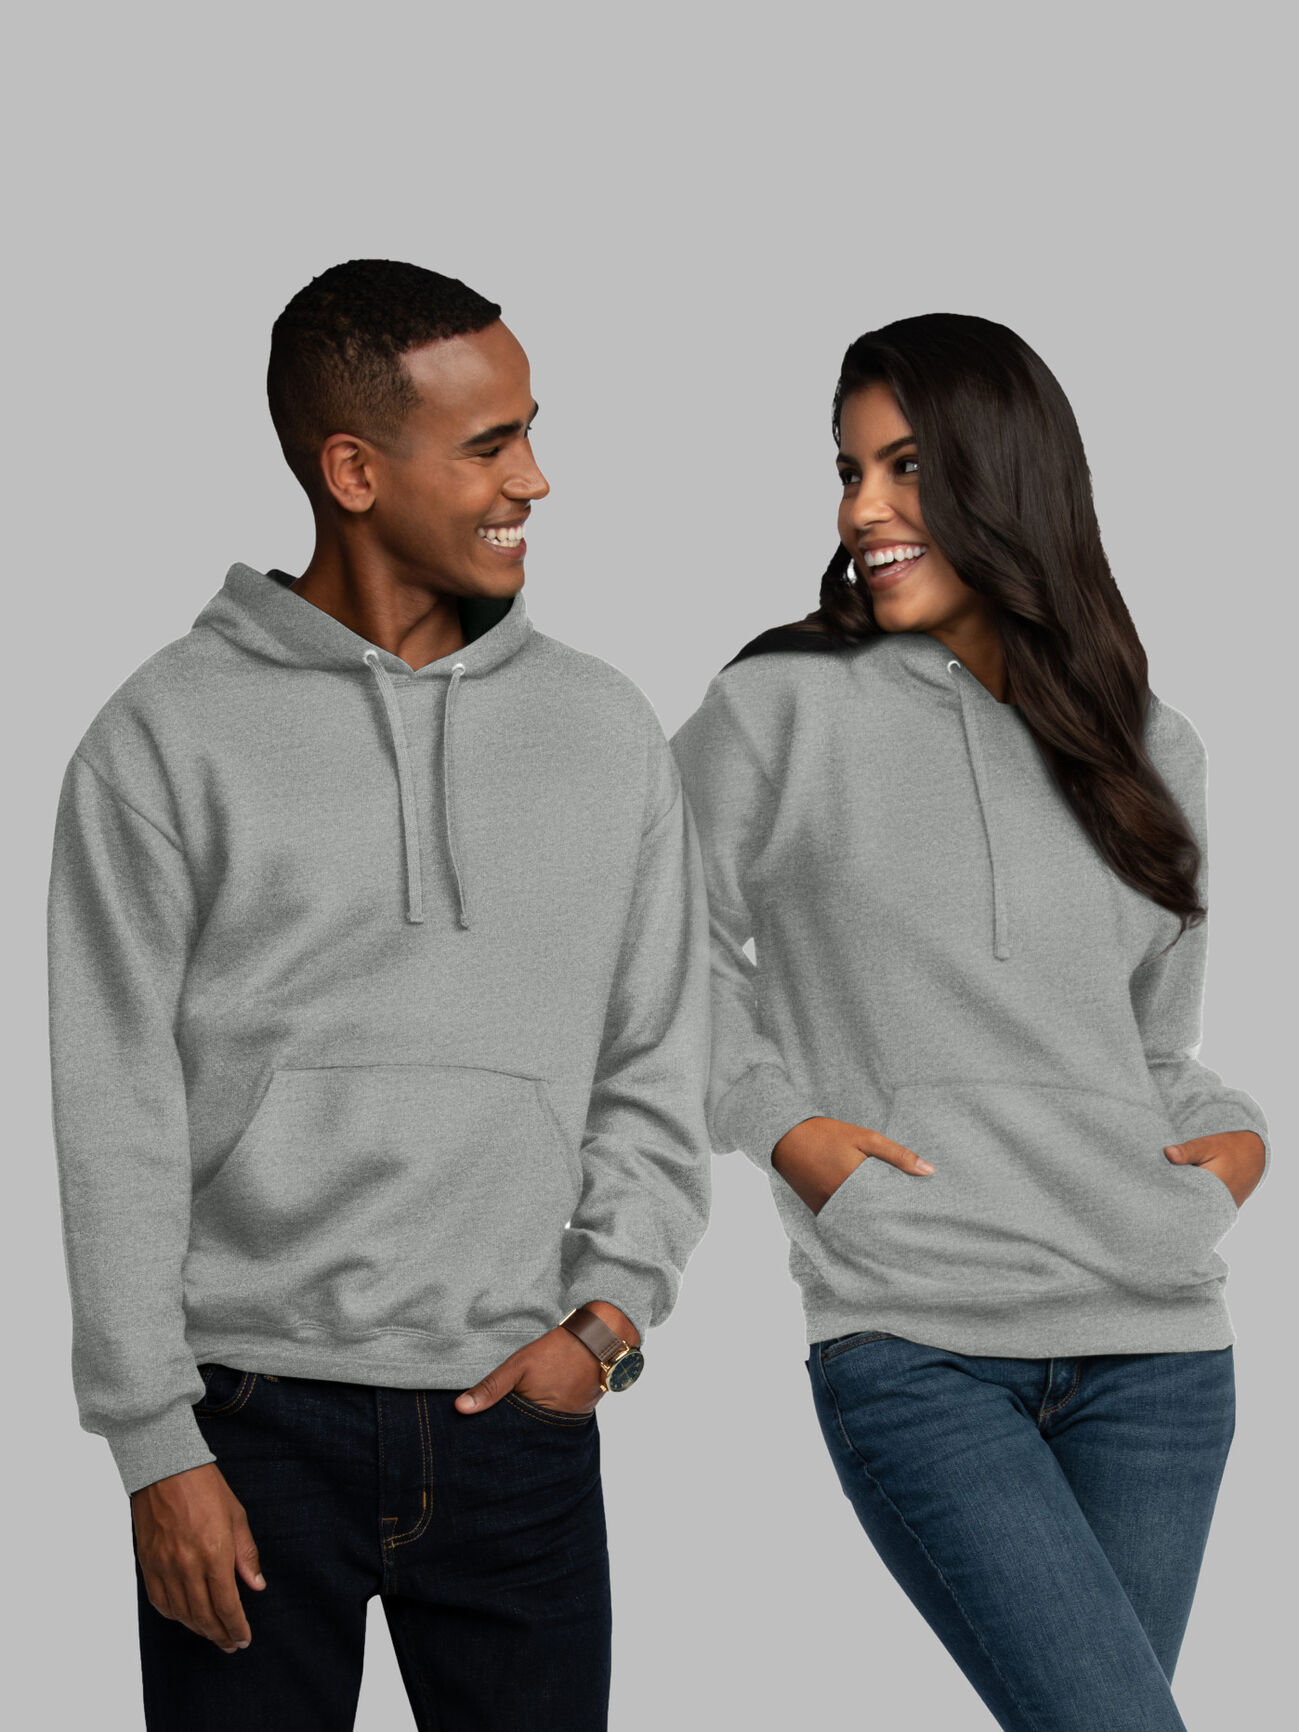 Classic Fleece Washed Hoodie  Hoodies, Colorful hoodies, Top outfits